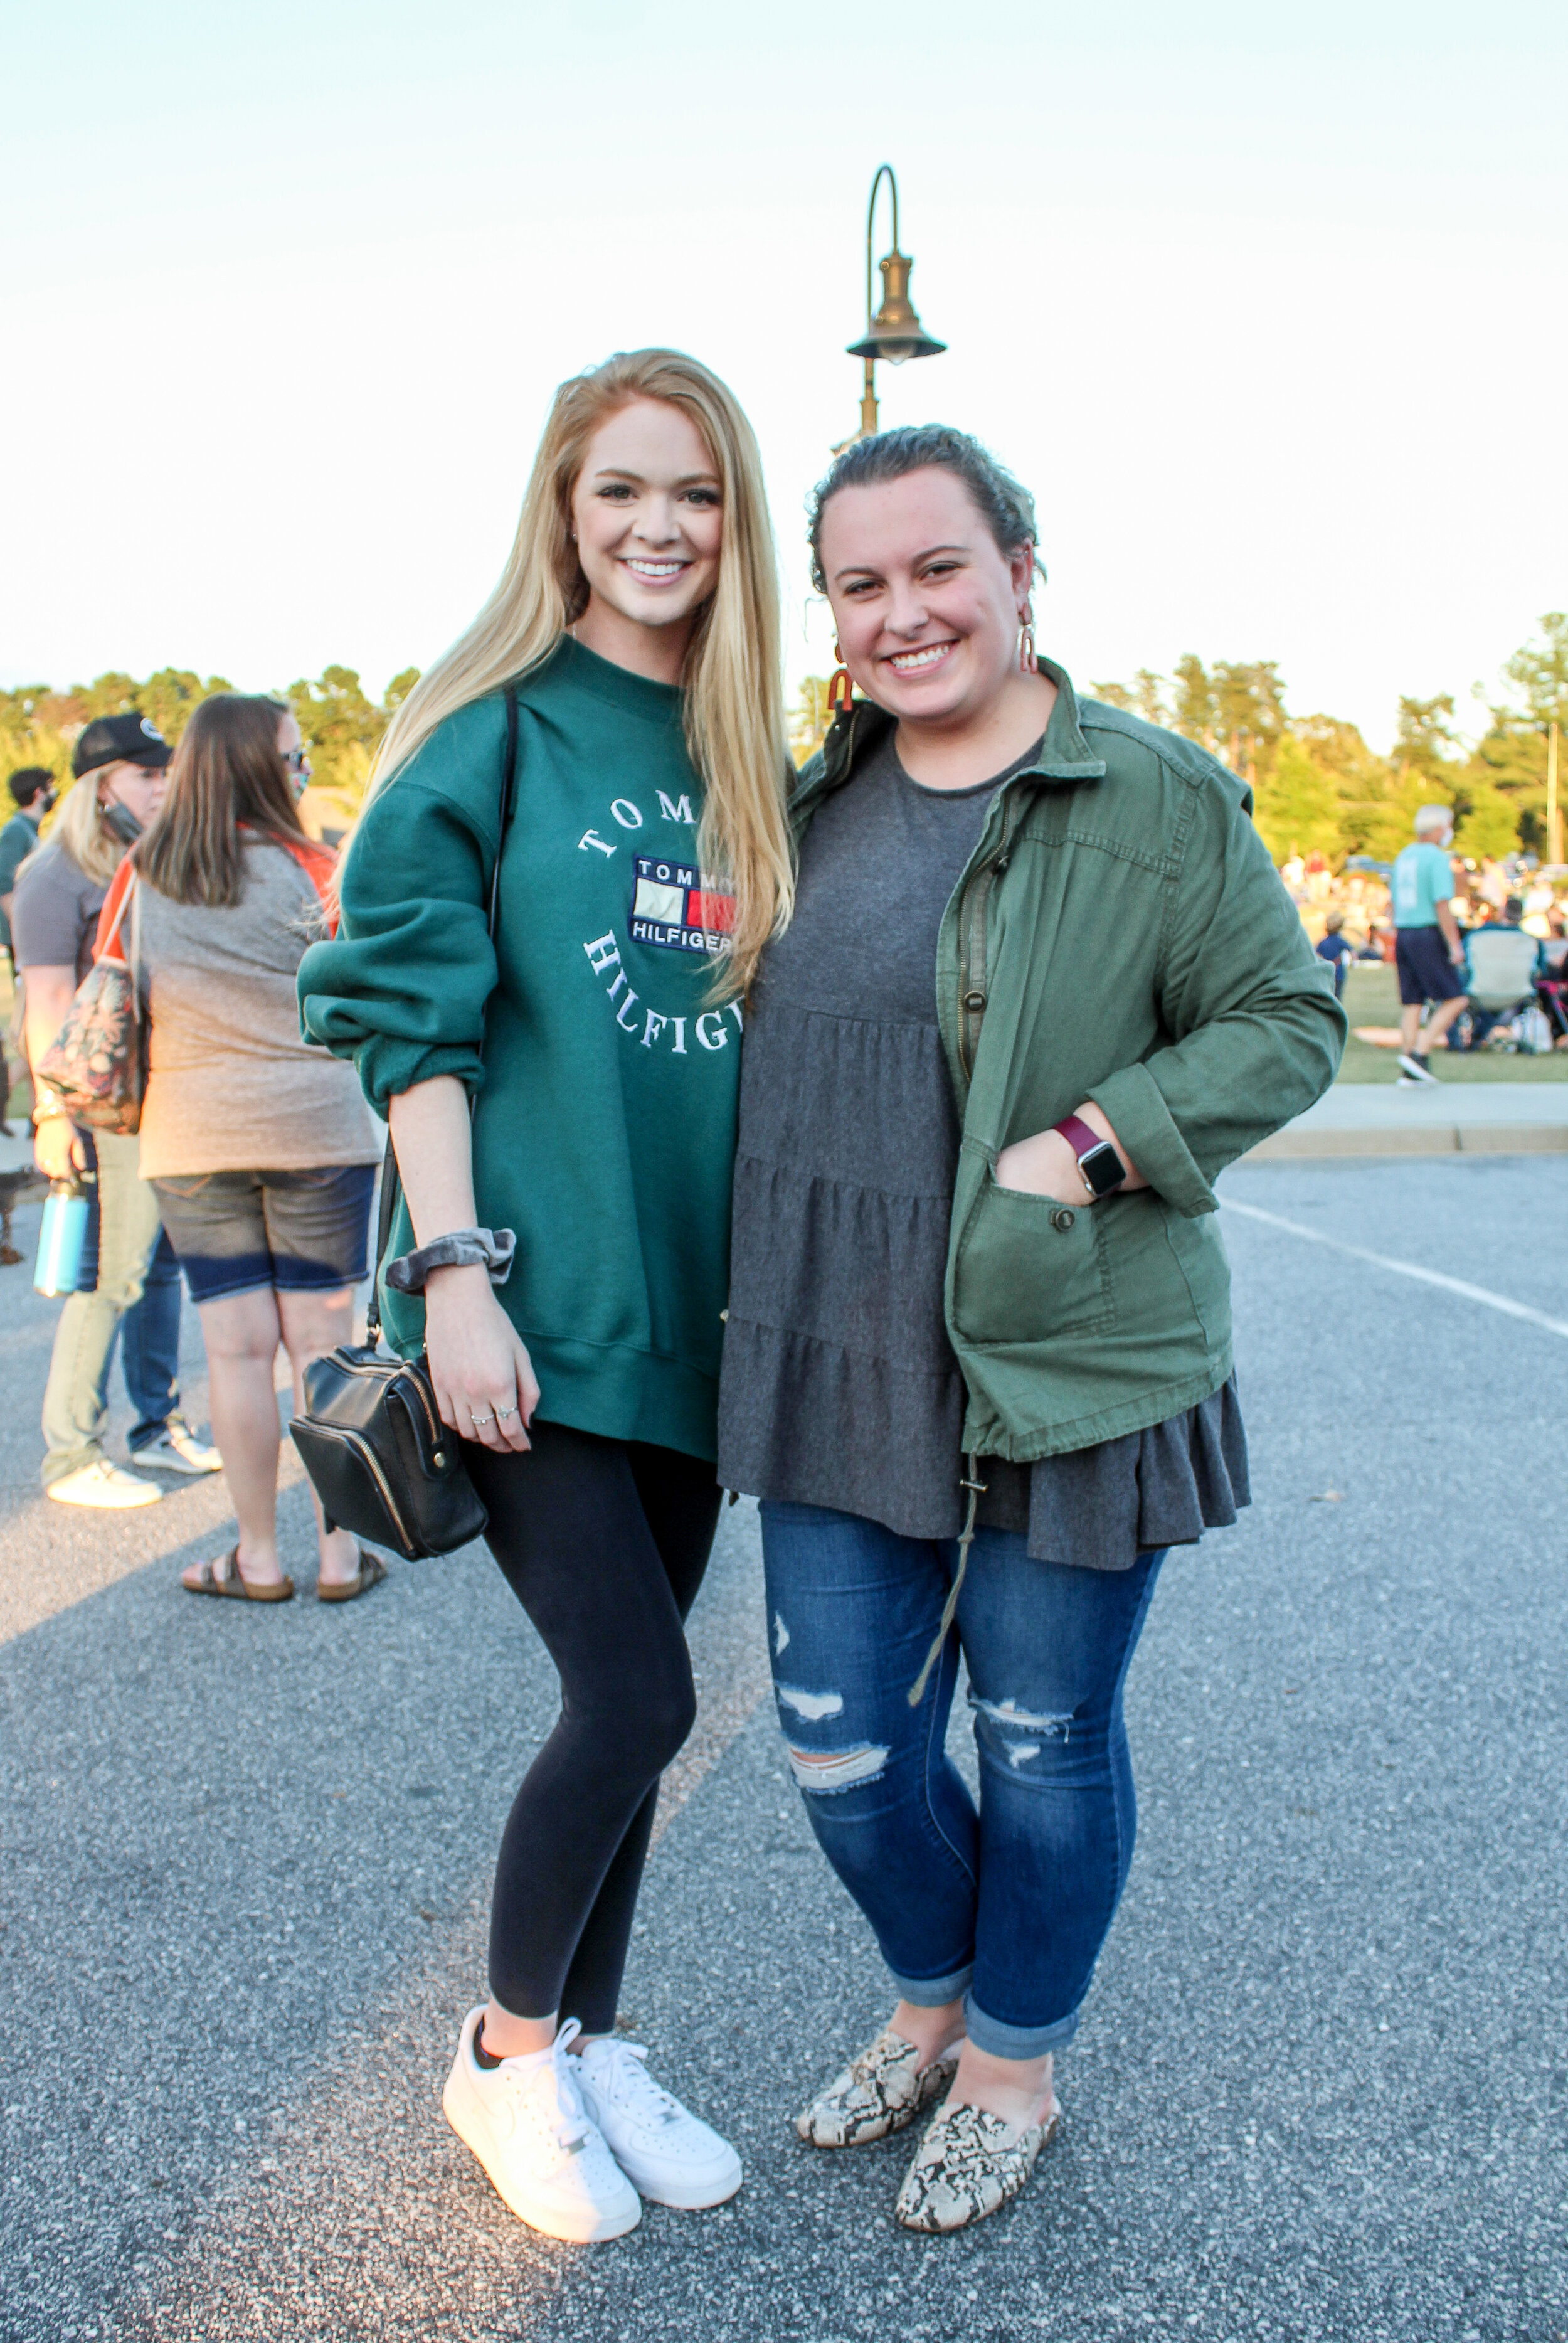 Taylor Loughry and Katie Ingle, mass communications students at North Greenville University, attend the Food Truck Rally together.